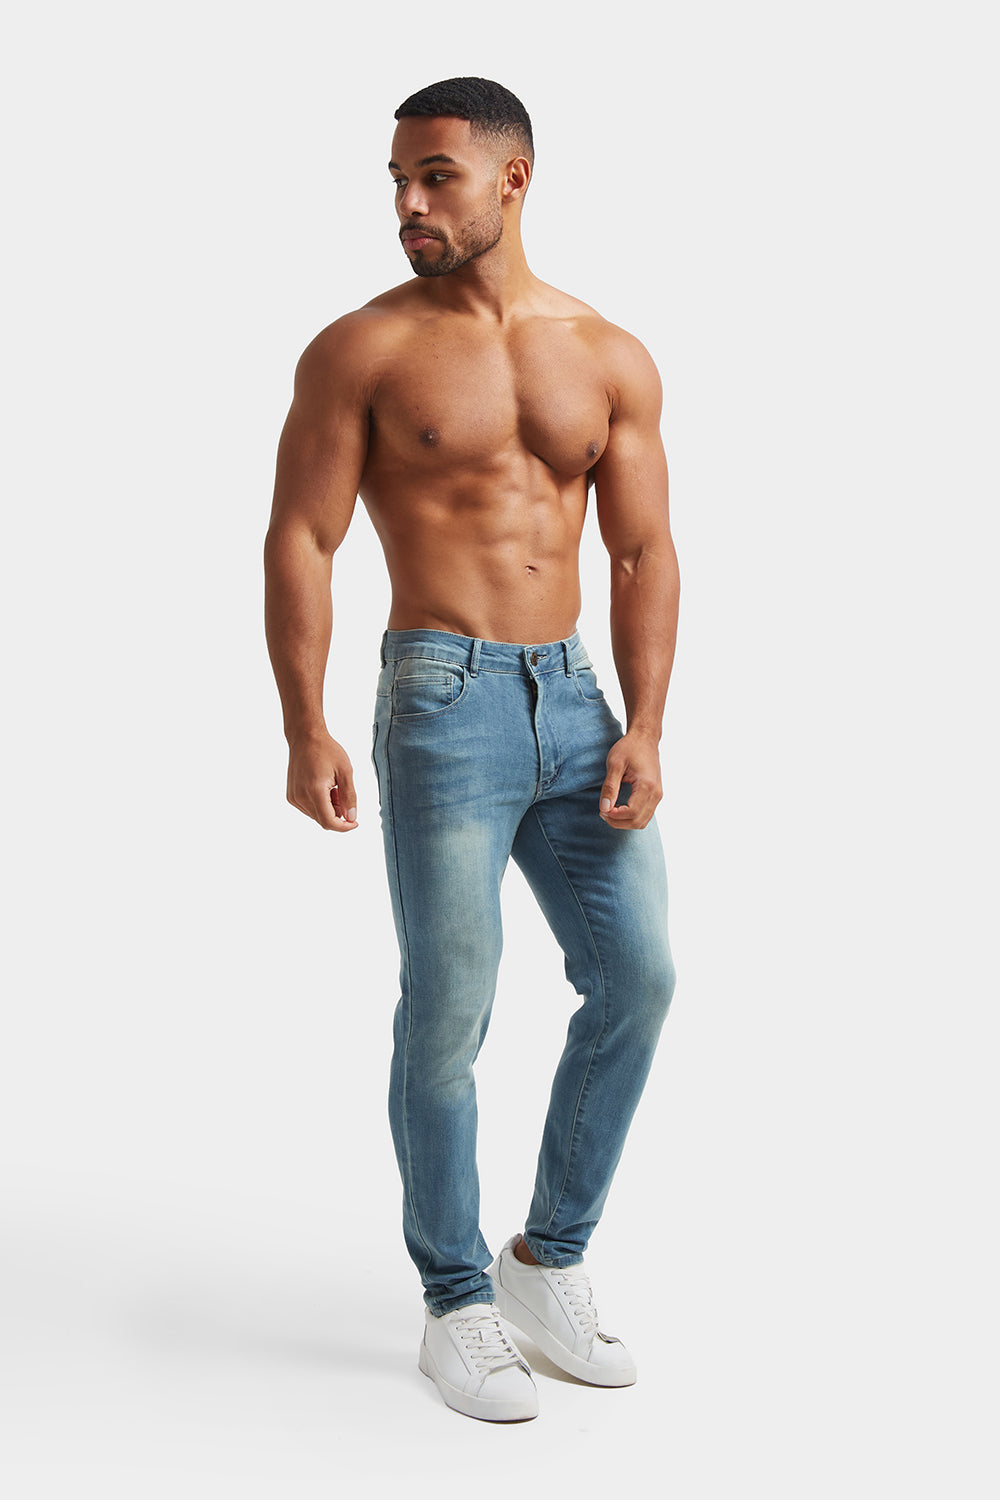 Should You Have Jeans Tailored?